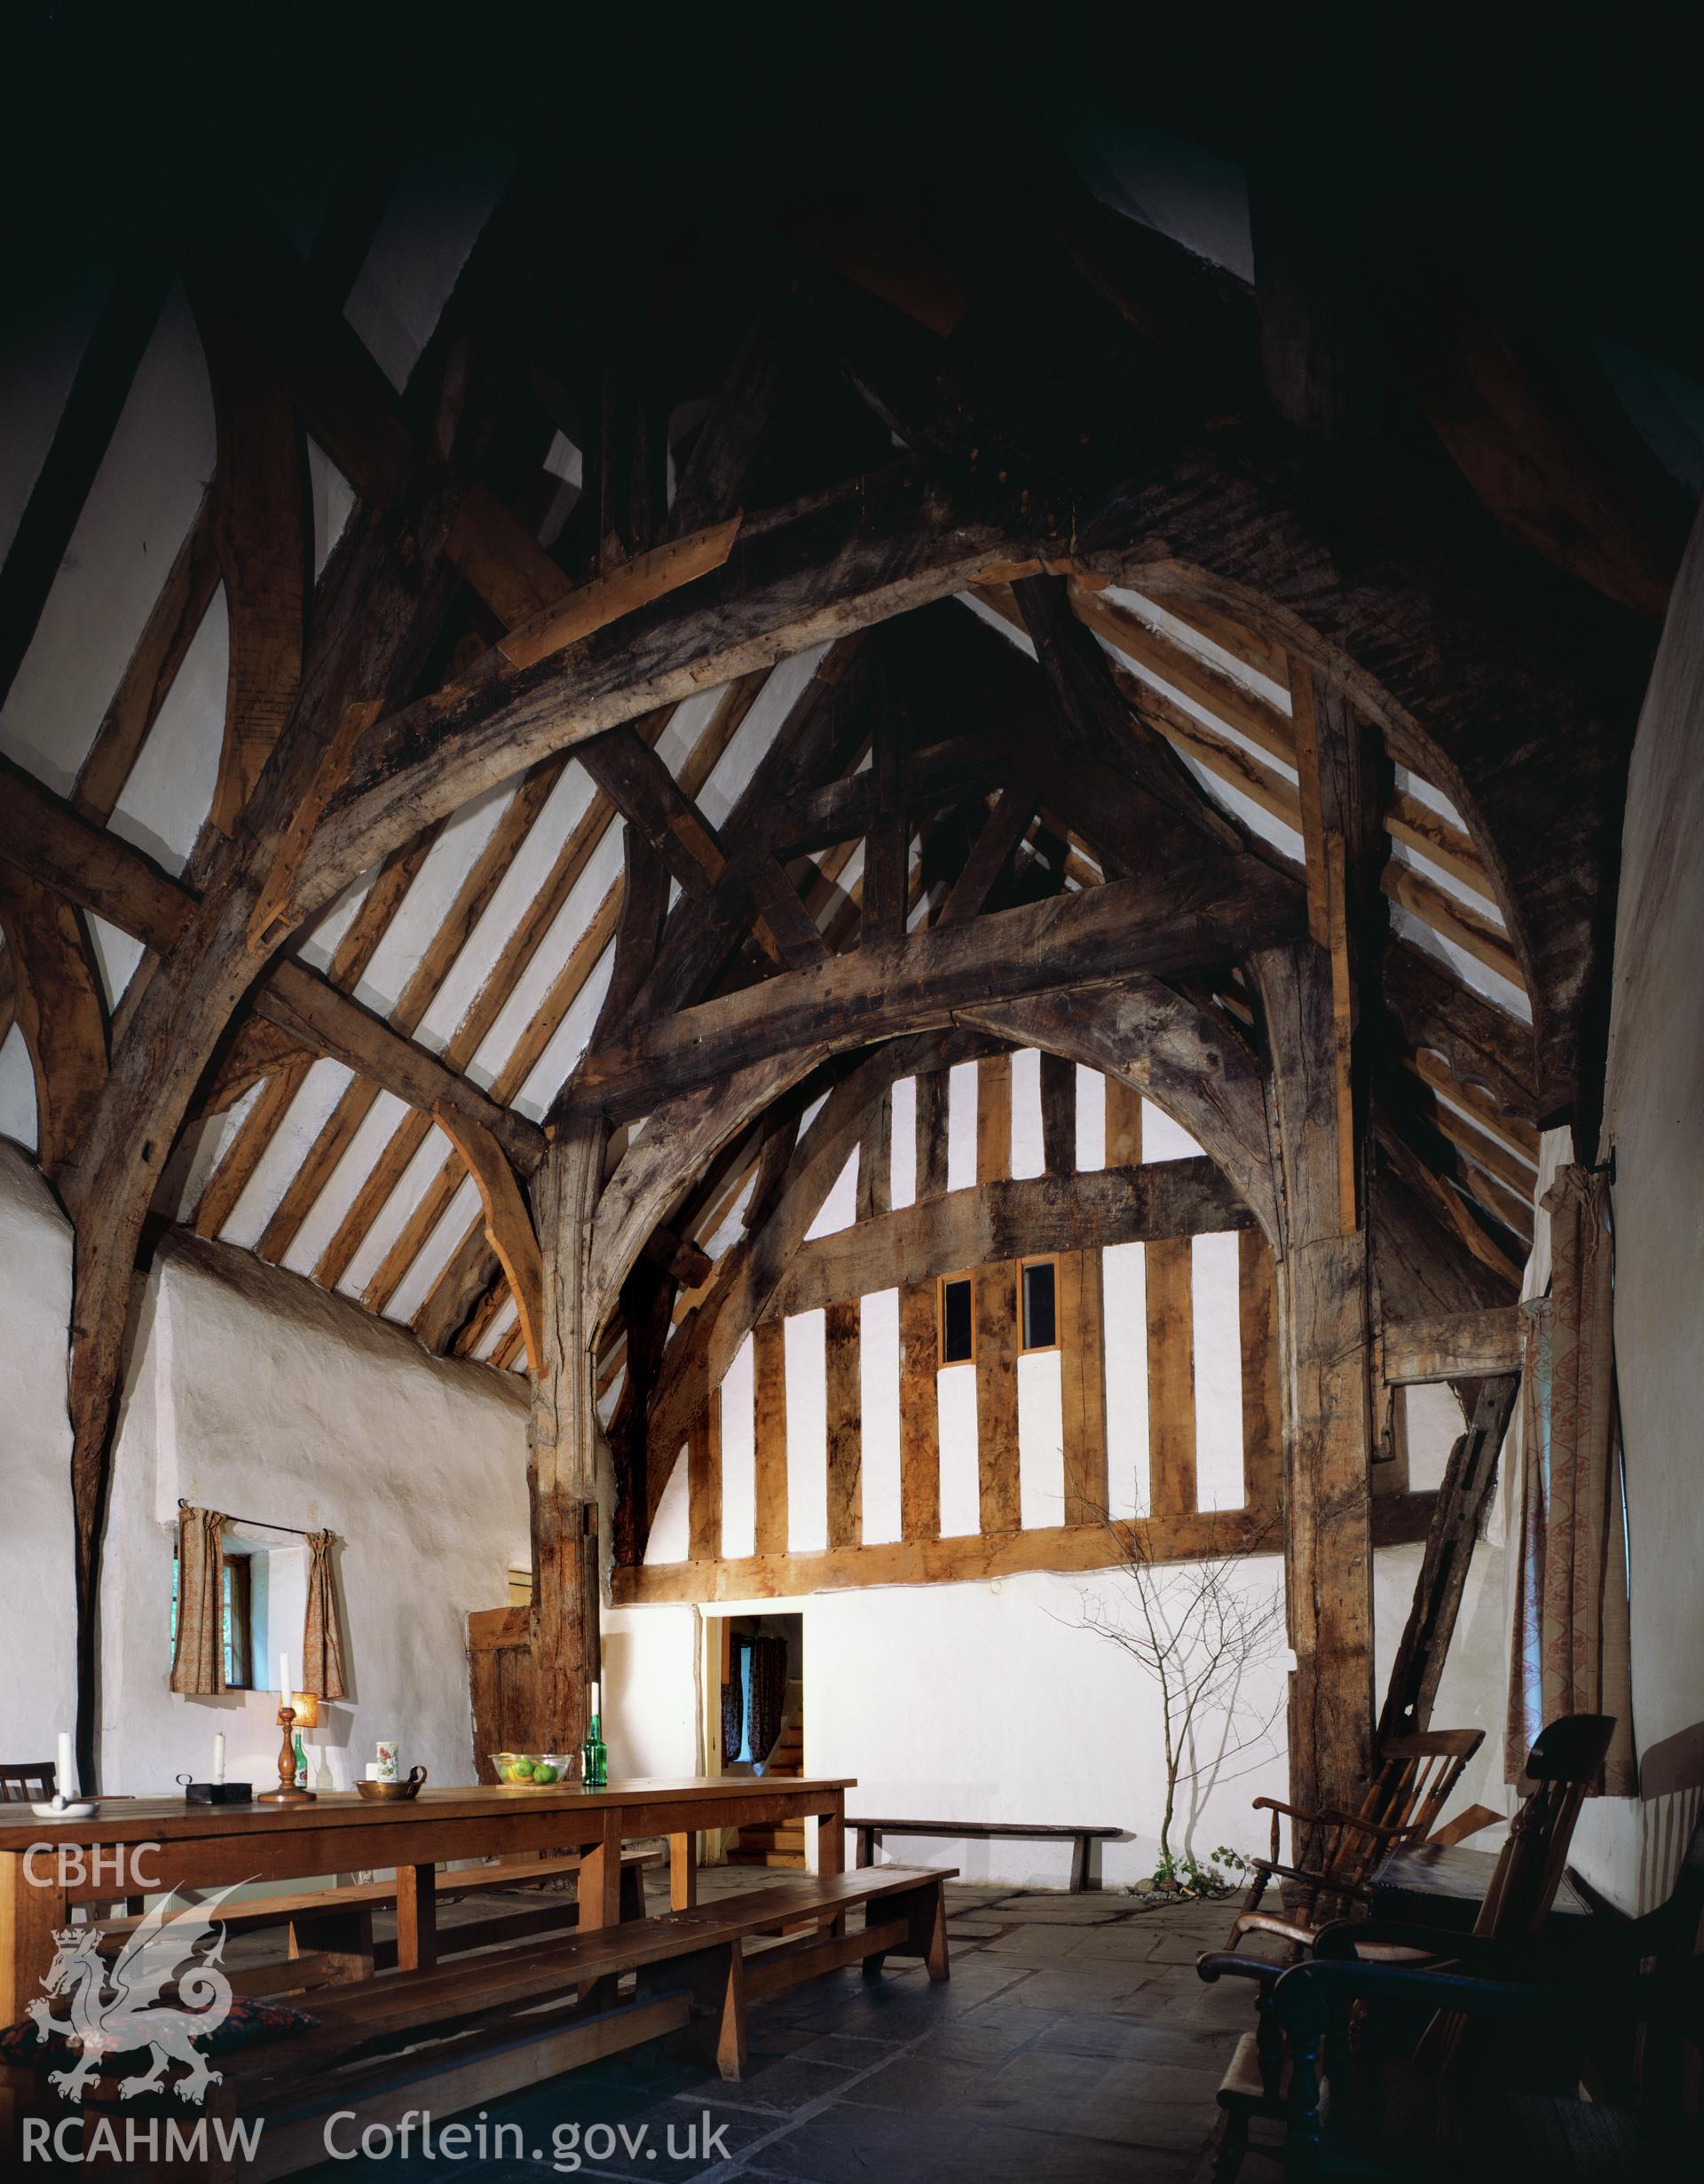 RCAHMW colour transparency showing interior view of Plas Uchaf, Cynwyd